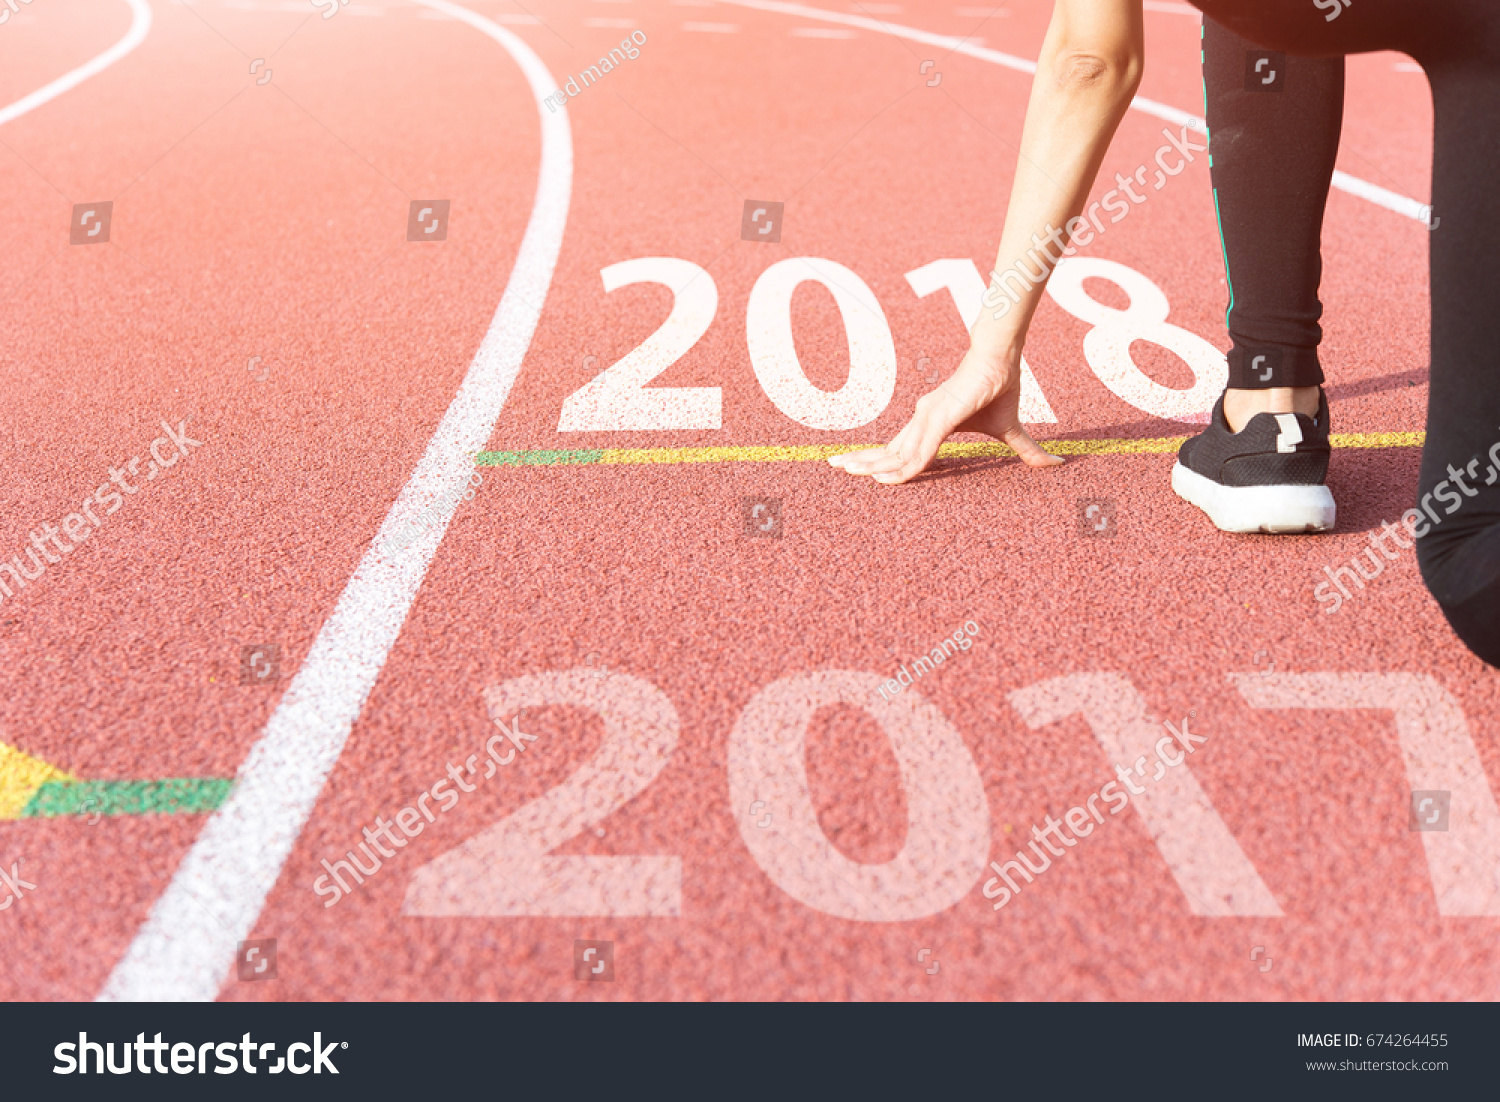 Athlete on Starting line waiting for the start in running track with text 2017 year, Start to new year #674264455